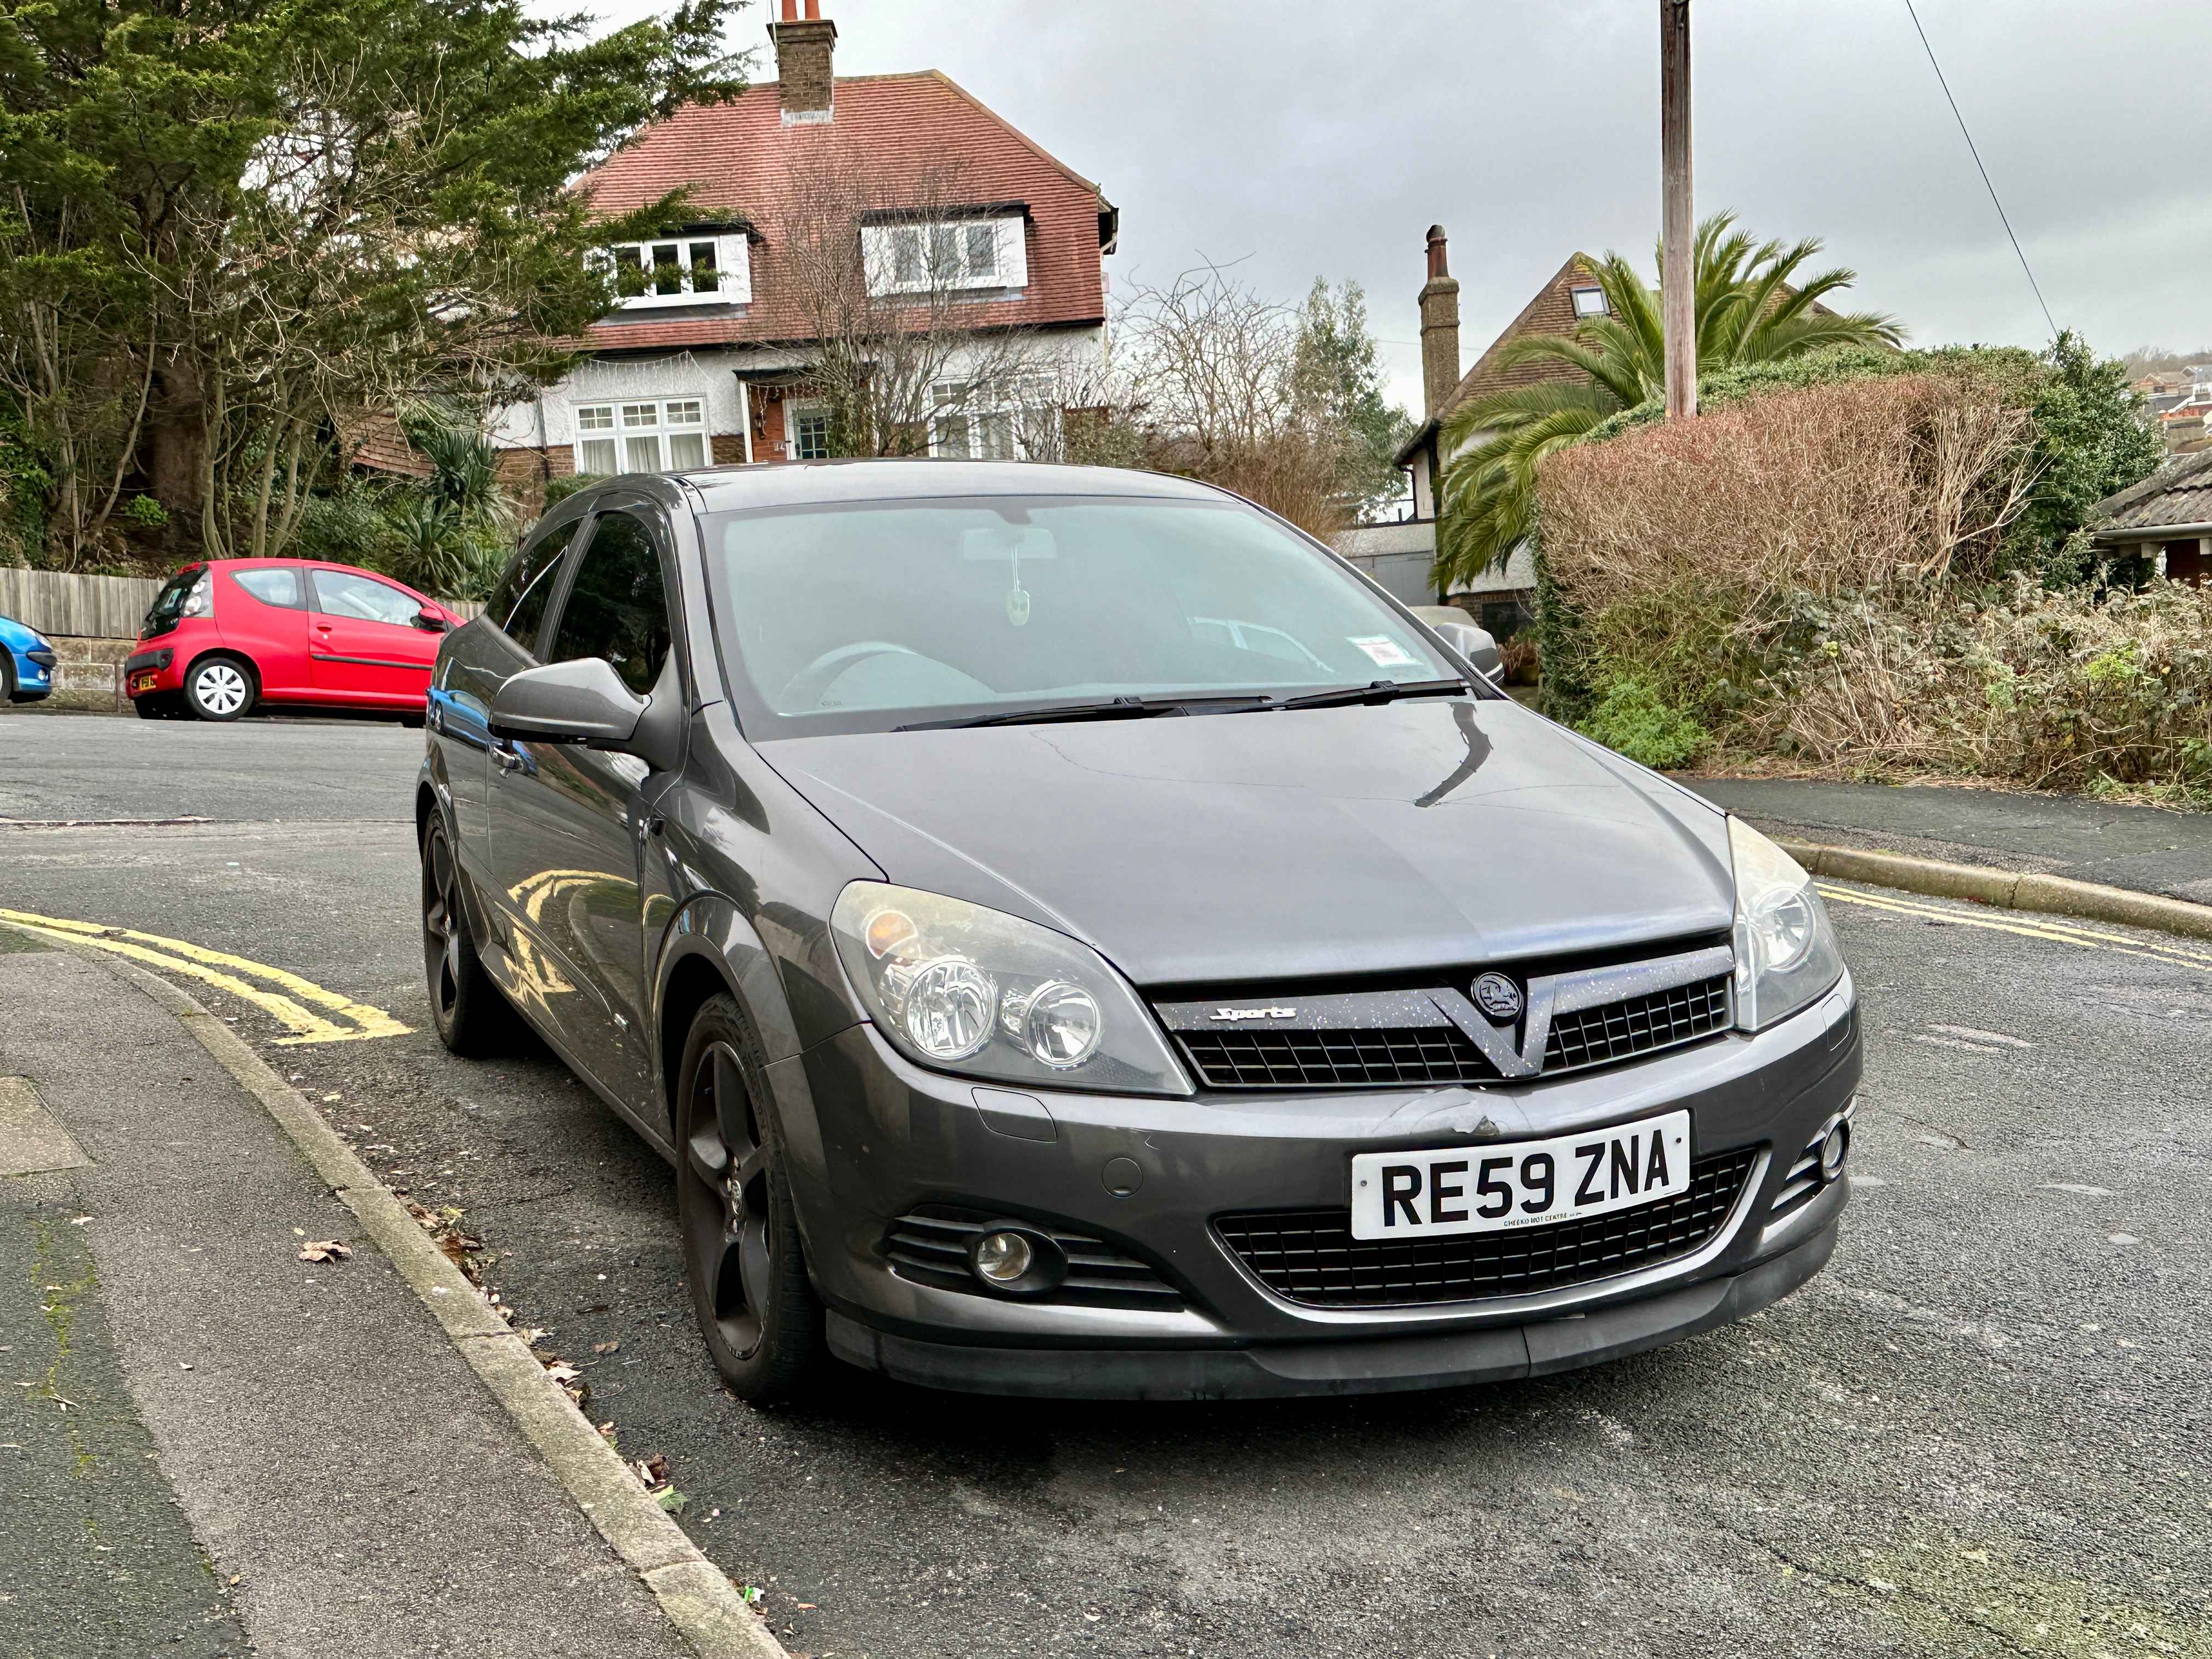 Photograph of RE59 ZNA - a Grey Vauxhall Astra parked in Hollingdean by a non-resident. The fourth of five photographs supplied by the residents of Hollingdean.